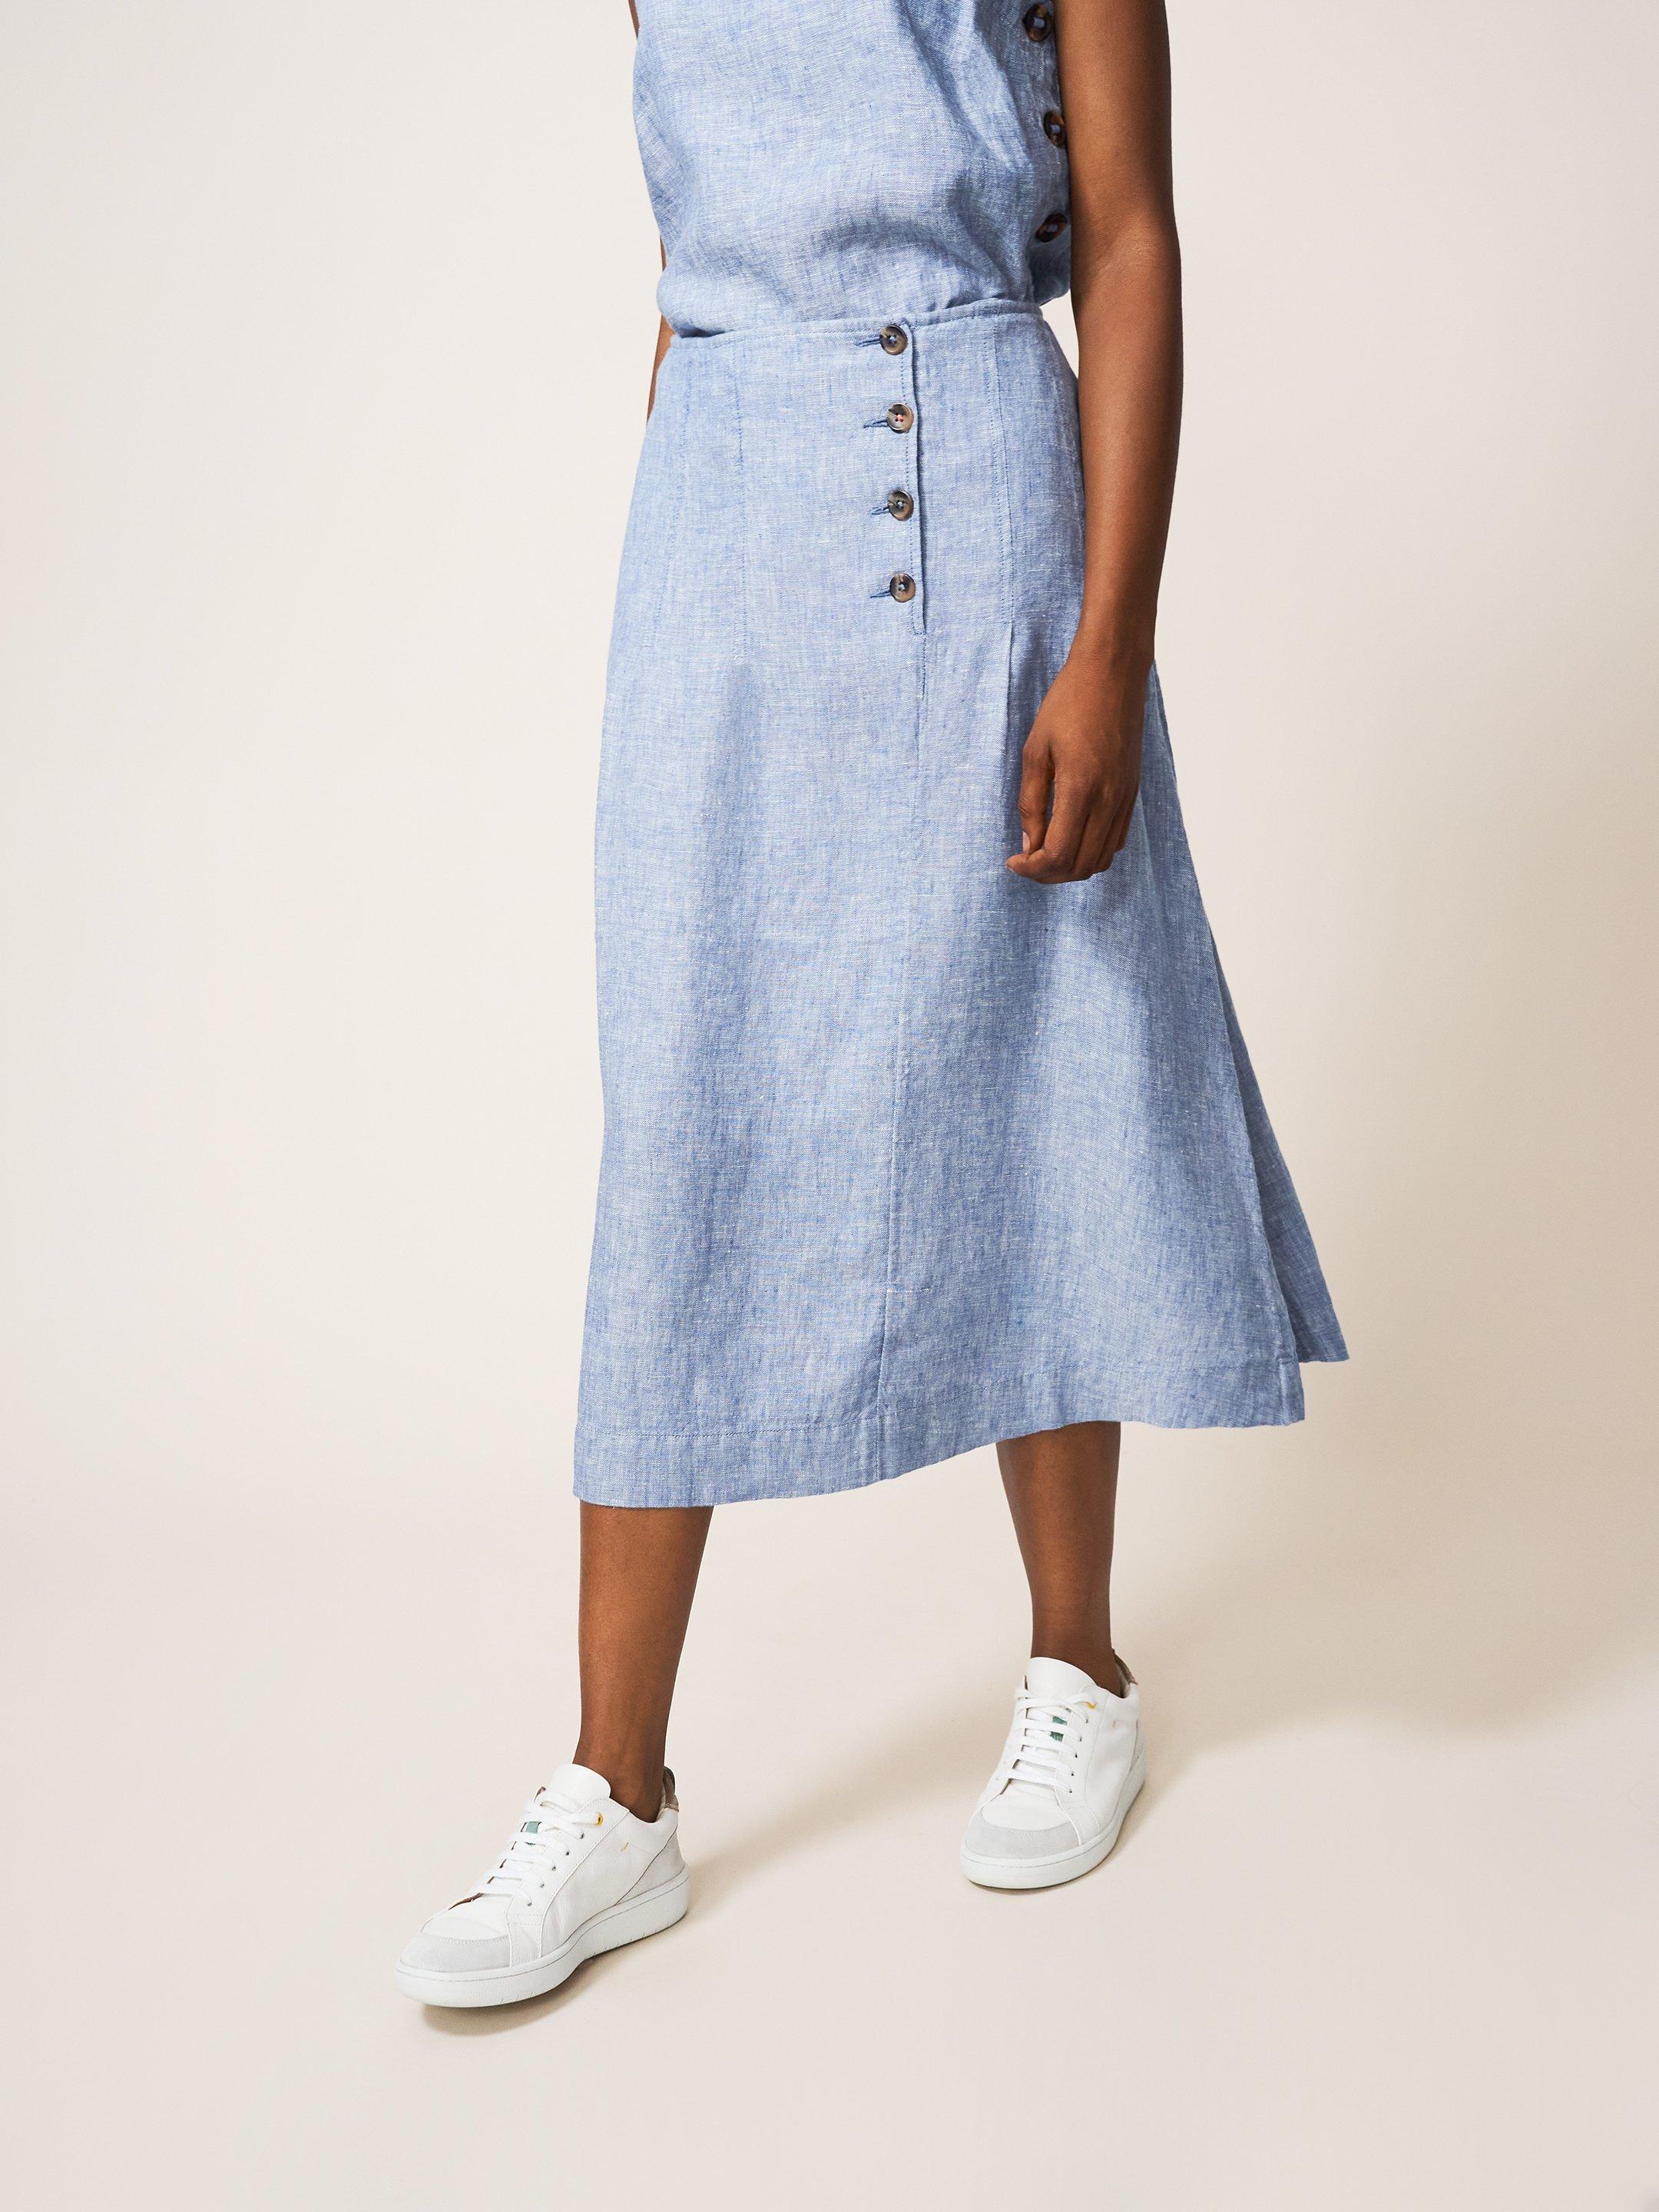 Ciara Linen Skirt in CHAMB BLUE - MODEL FRONT